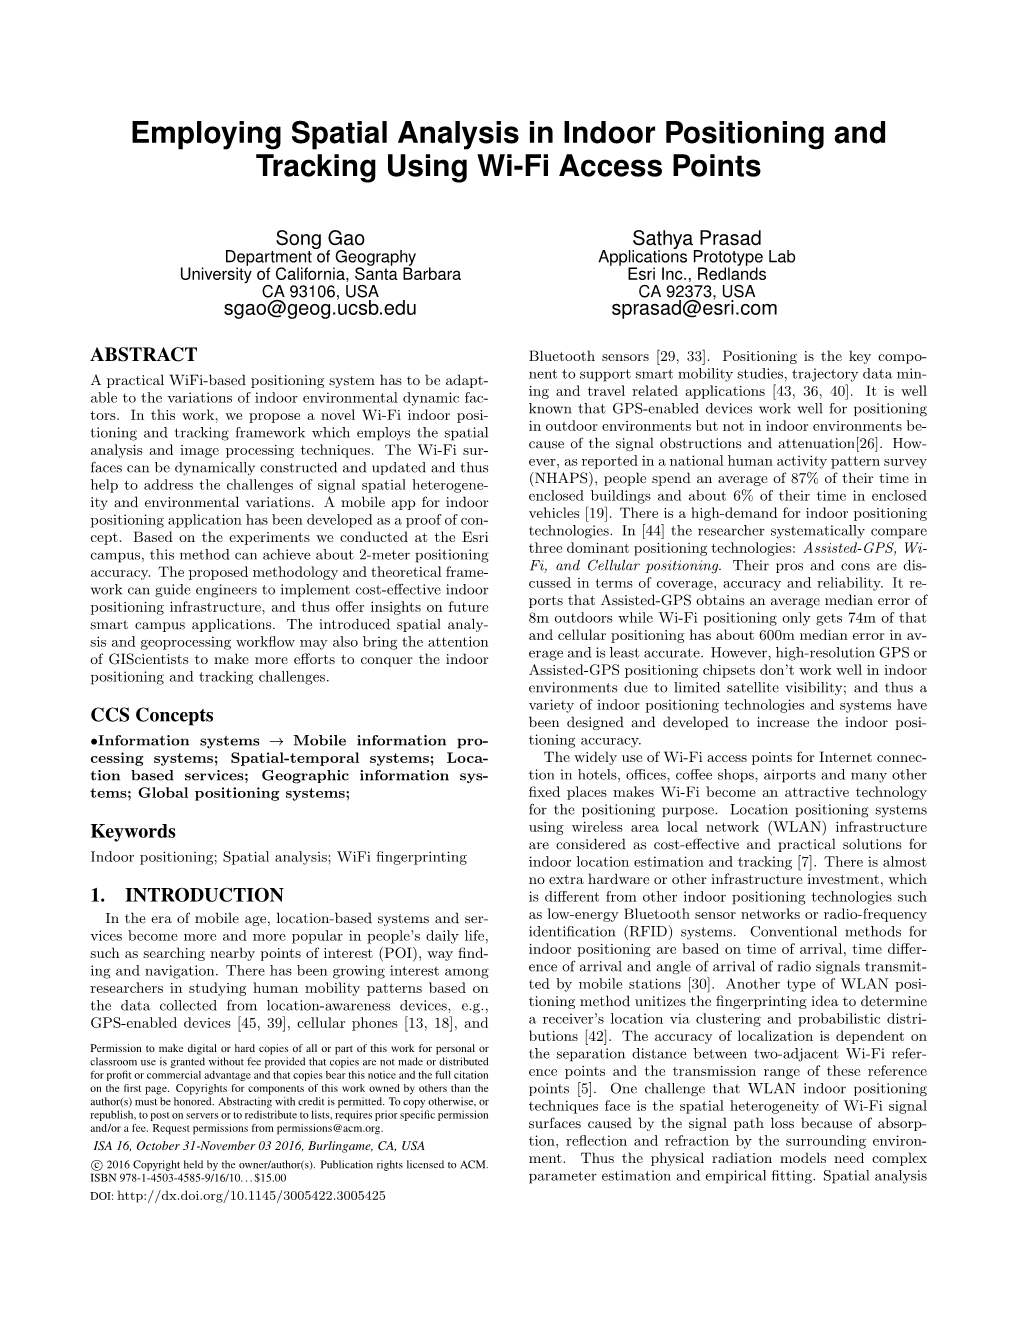 Employing Spatial Analysis in Indoor Positioning and Tracking Using Wi-Fi Access Points